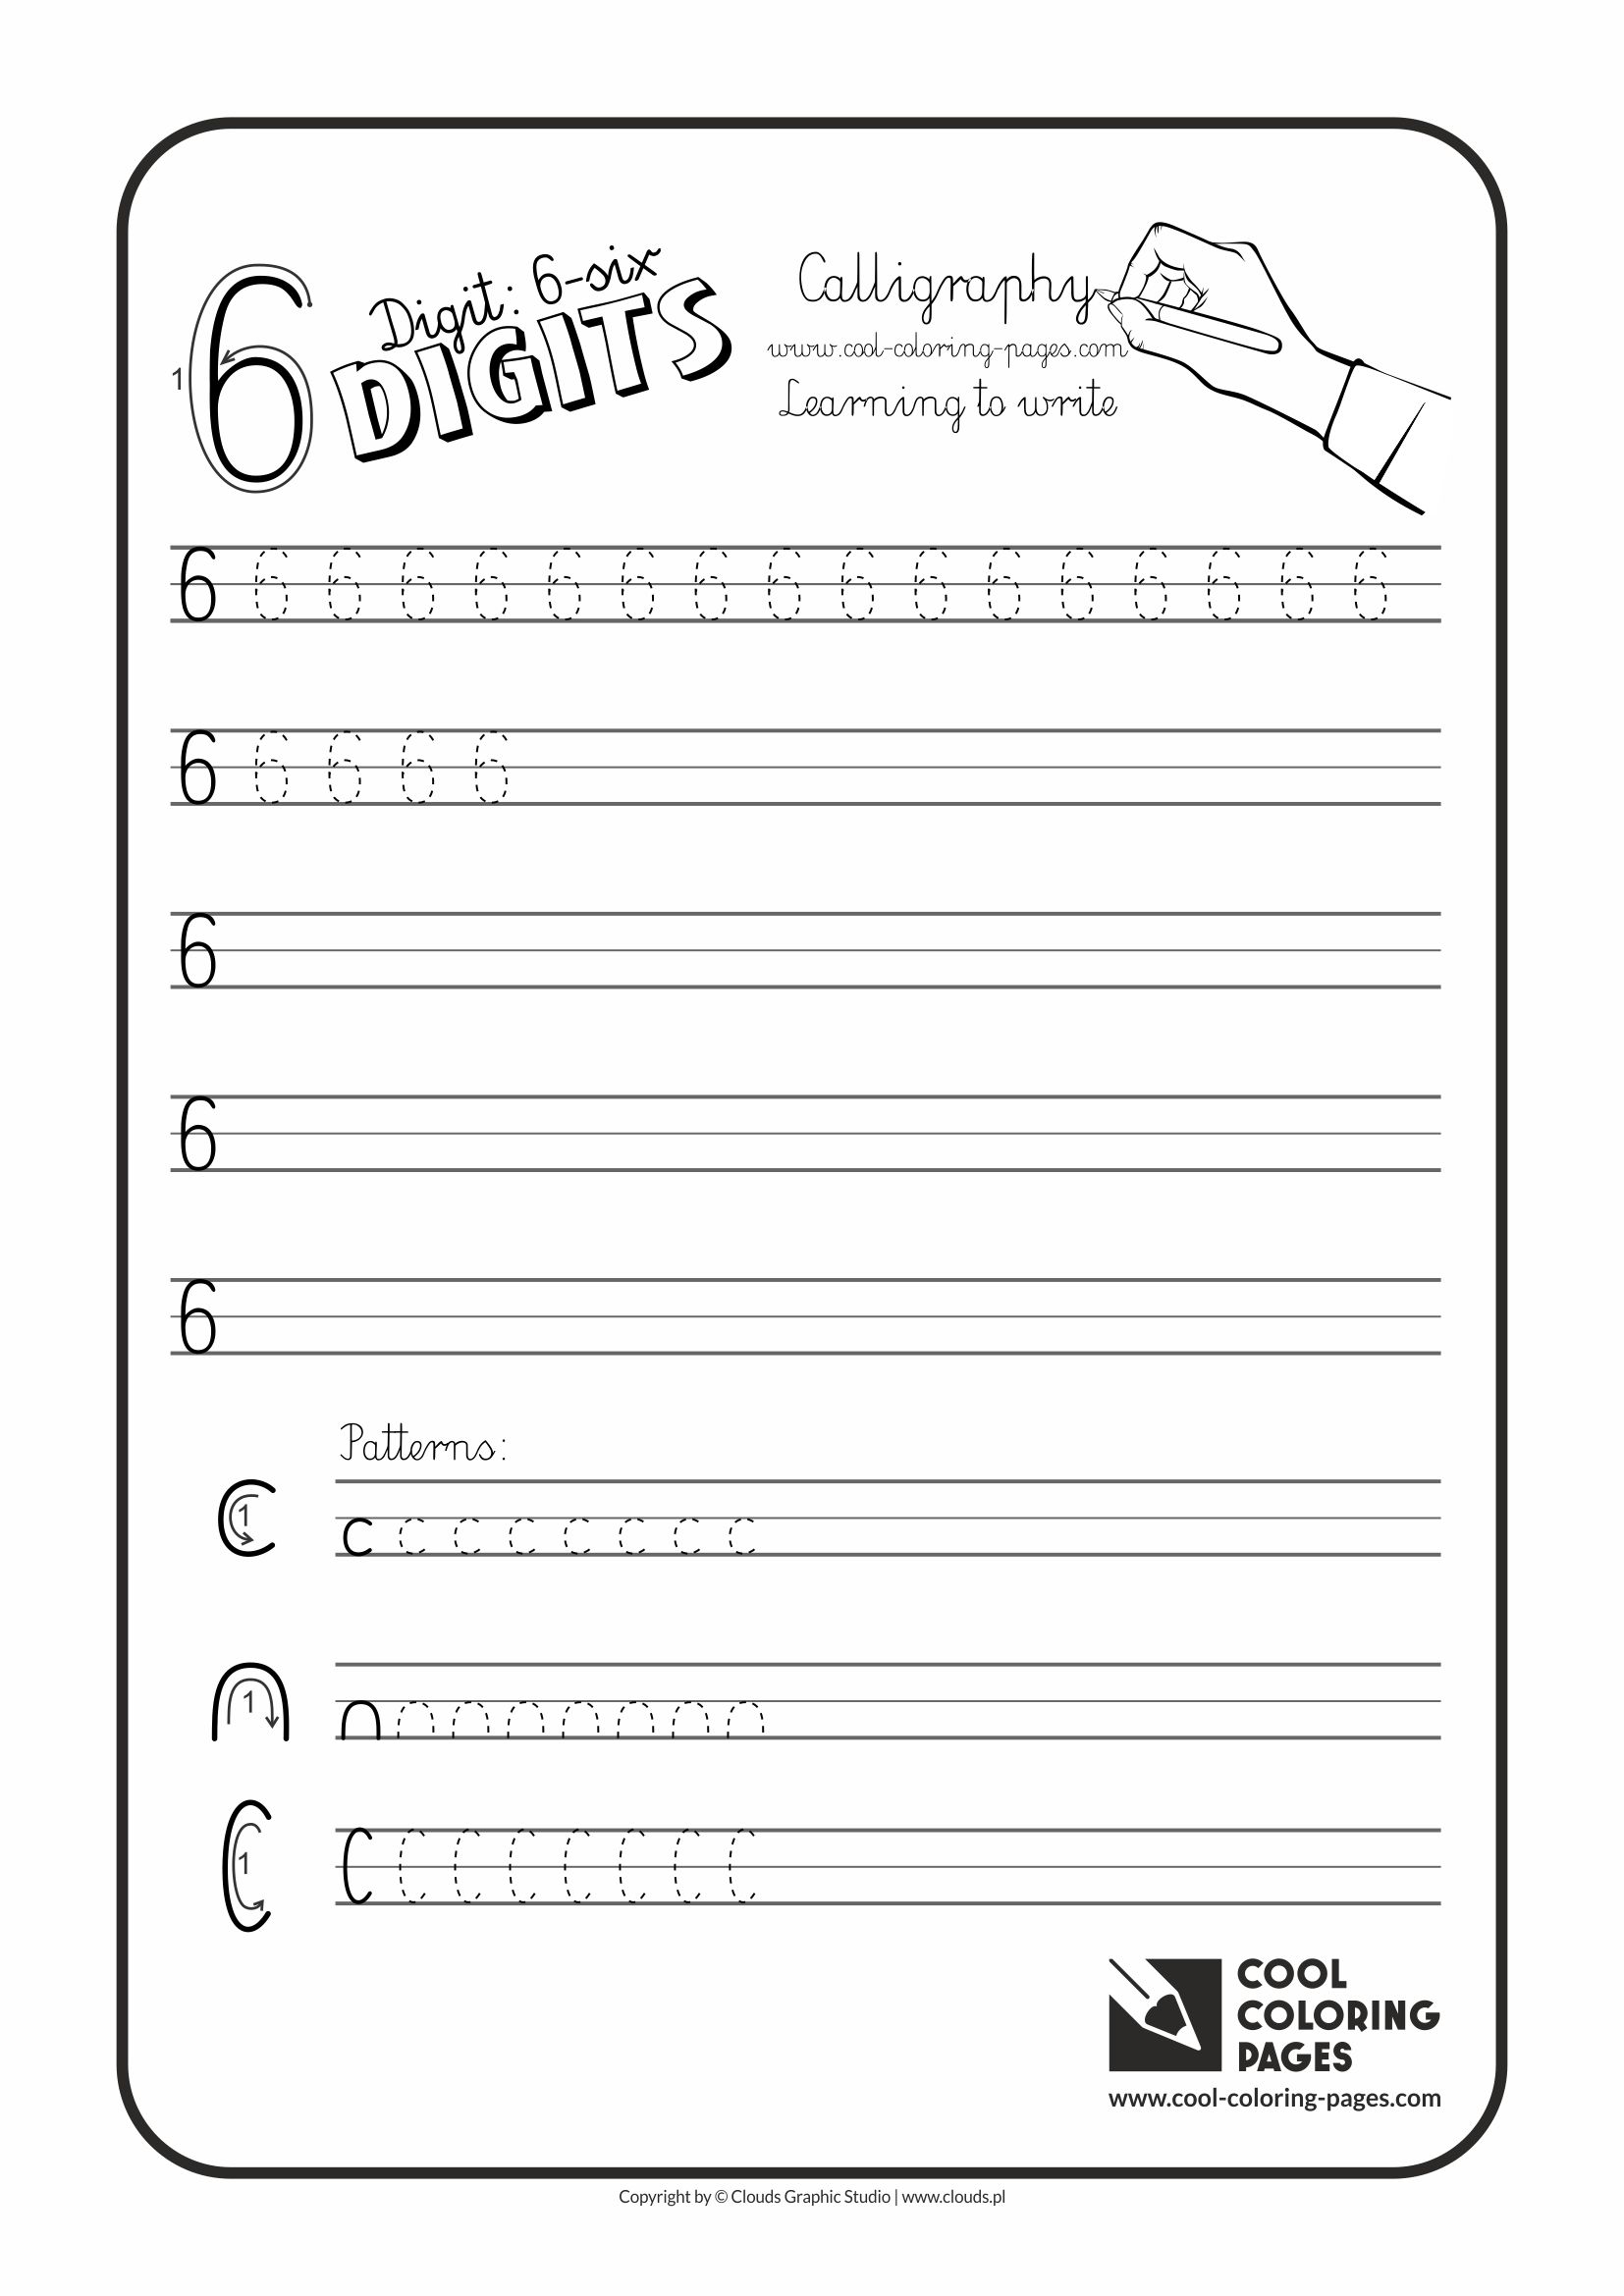 Cool Coloring Pages / Calligraphy / Digit 6 / Handwriting for kids